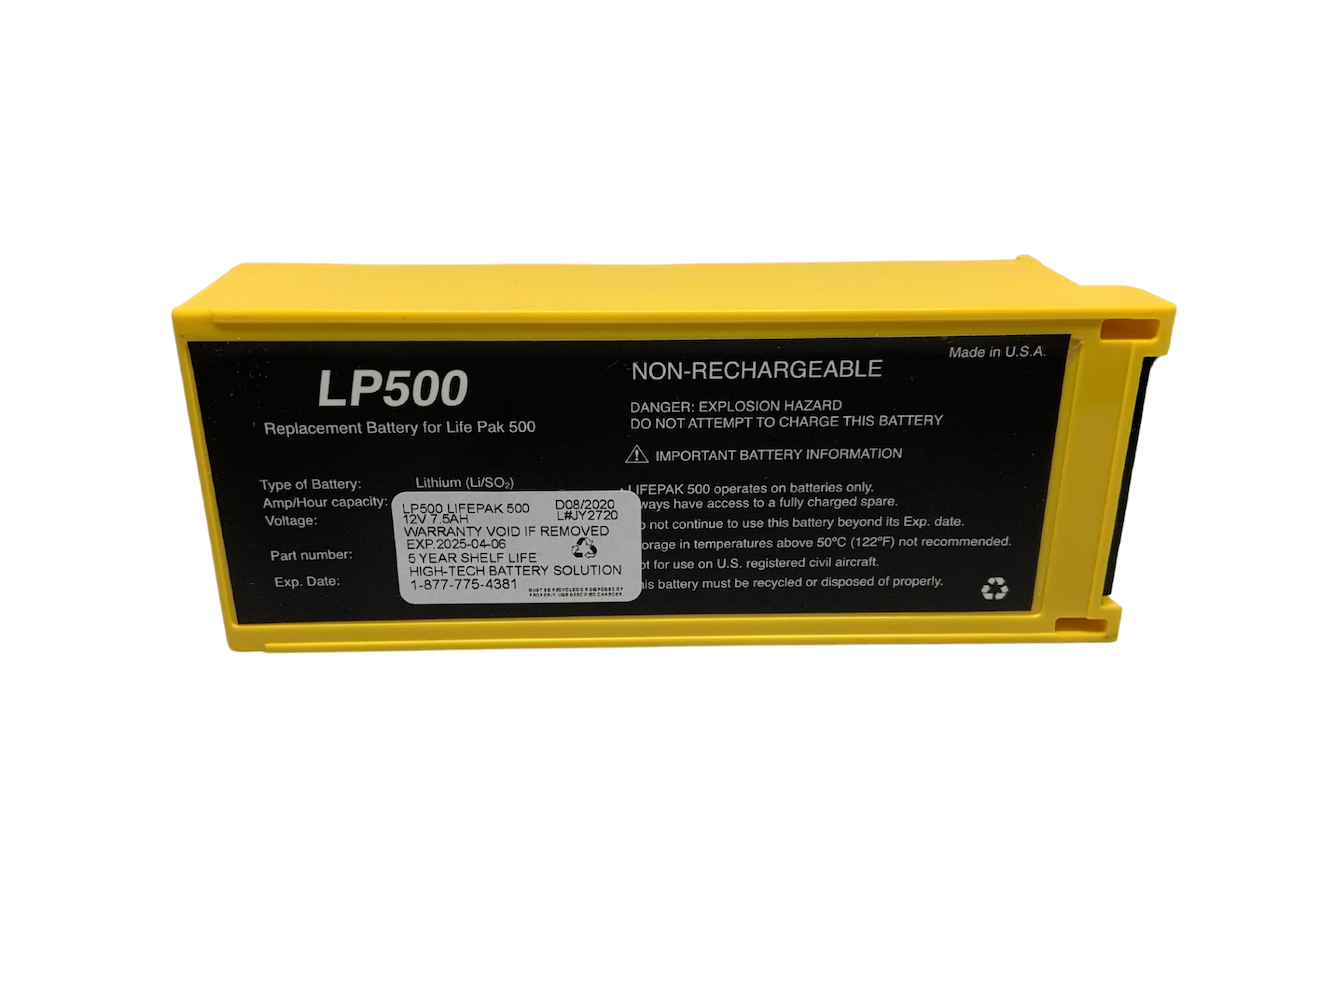 What is our current born on dates for LifePak 500 batteries?